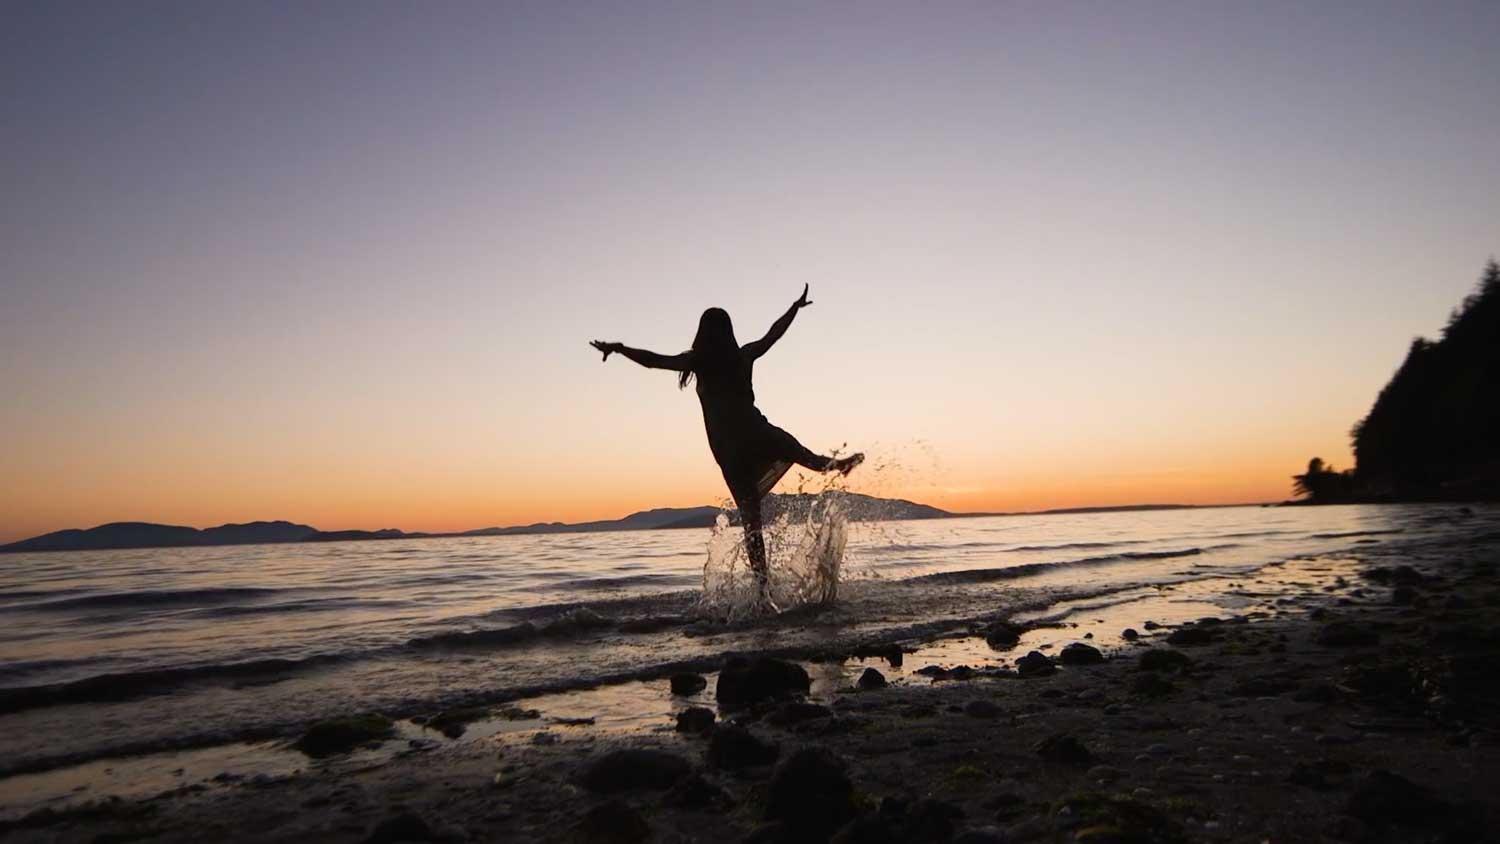 A woman stands on a beach, arms outstretched, playing in the surf during sunset